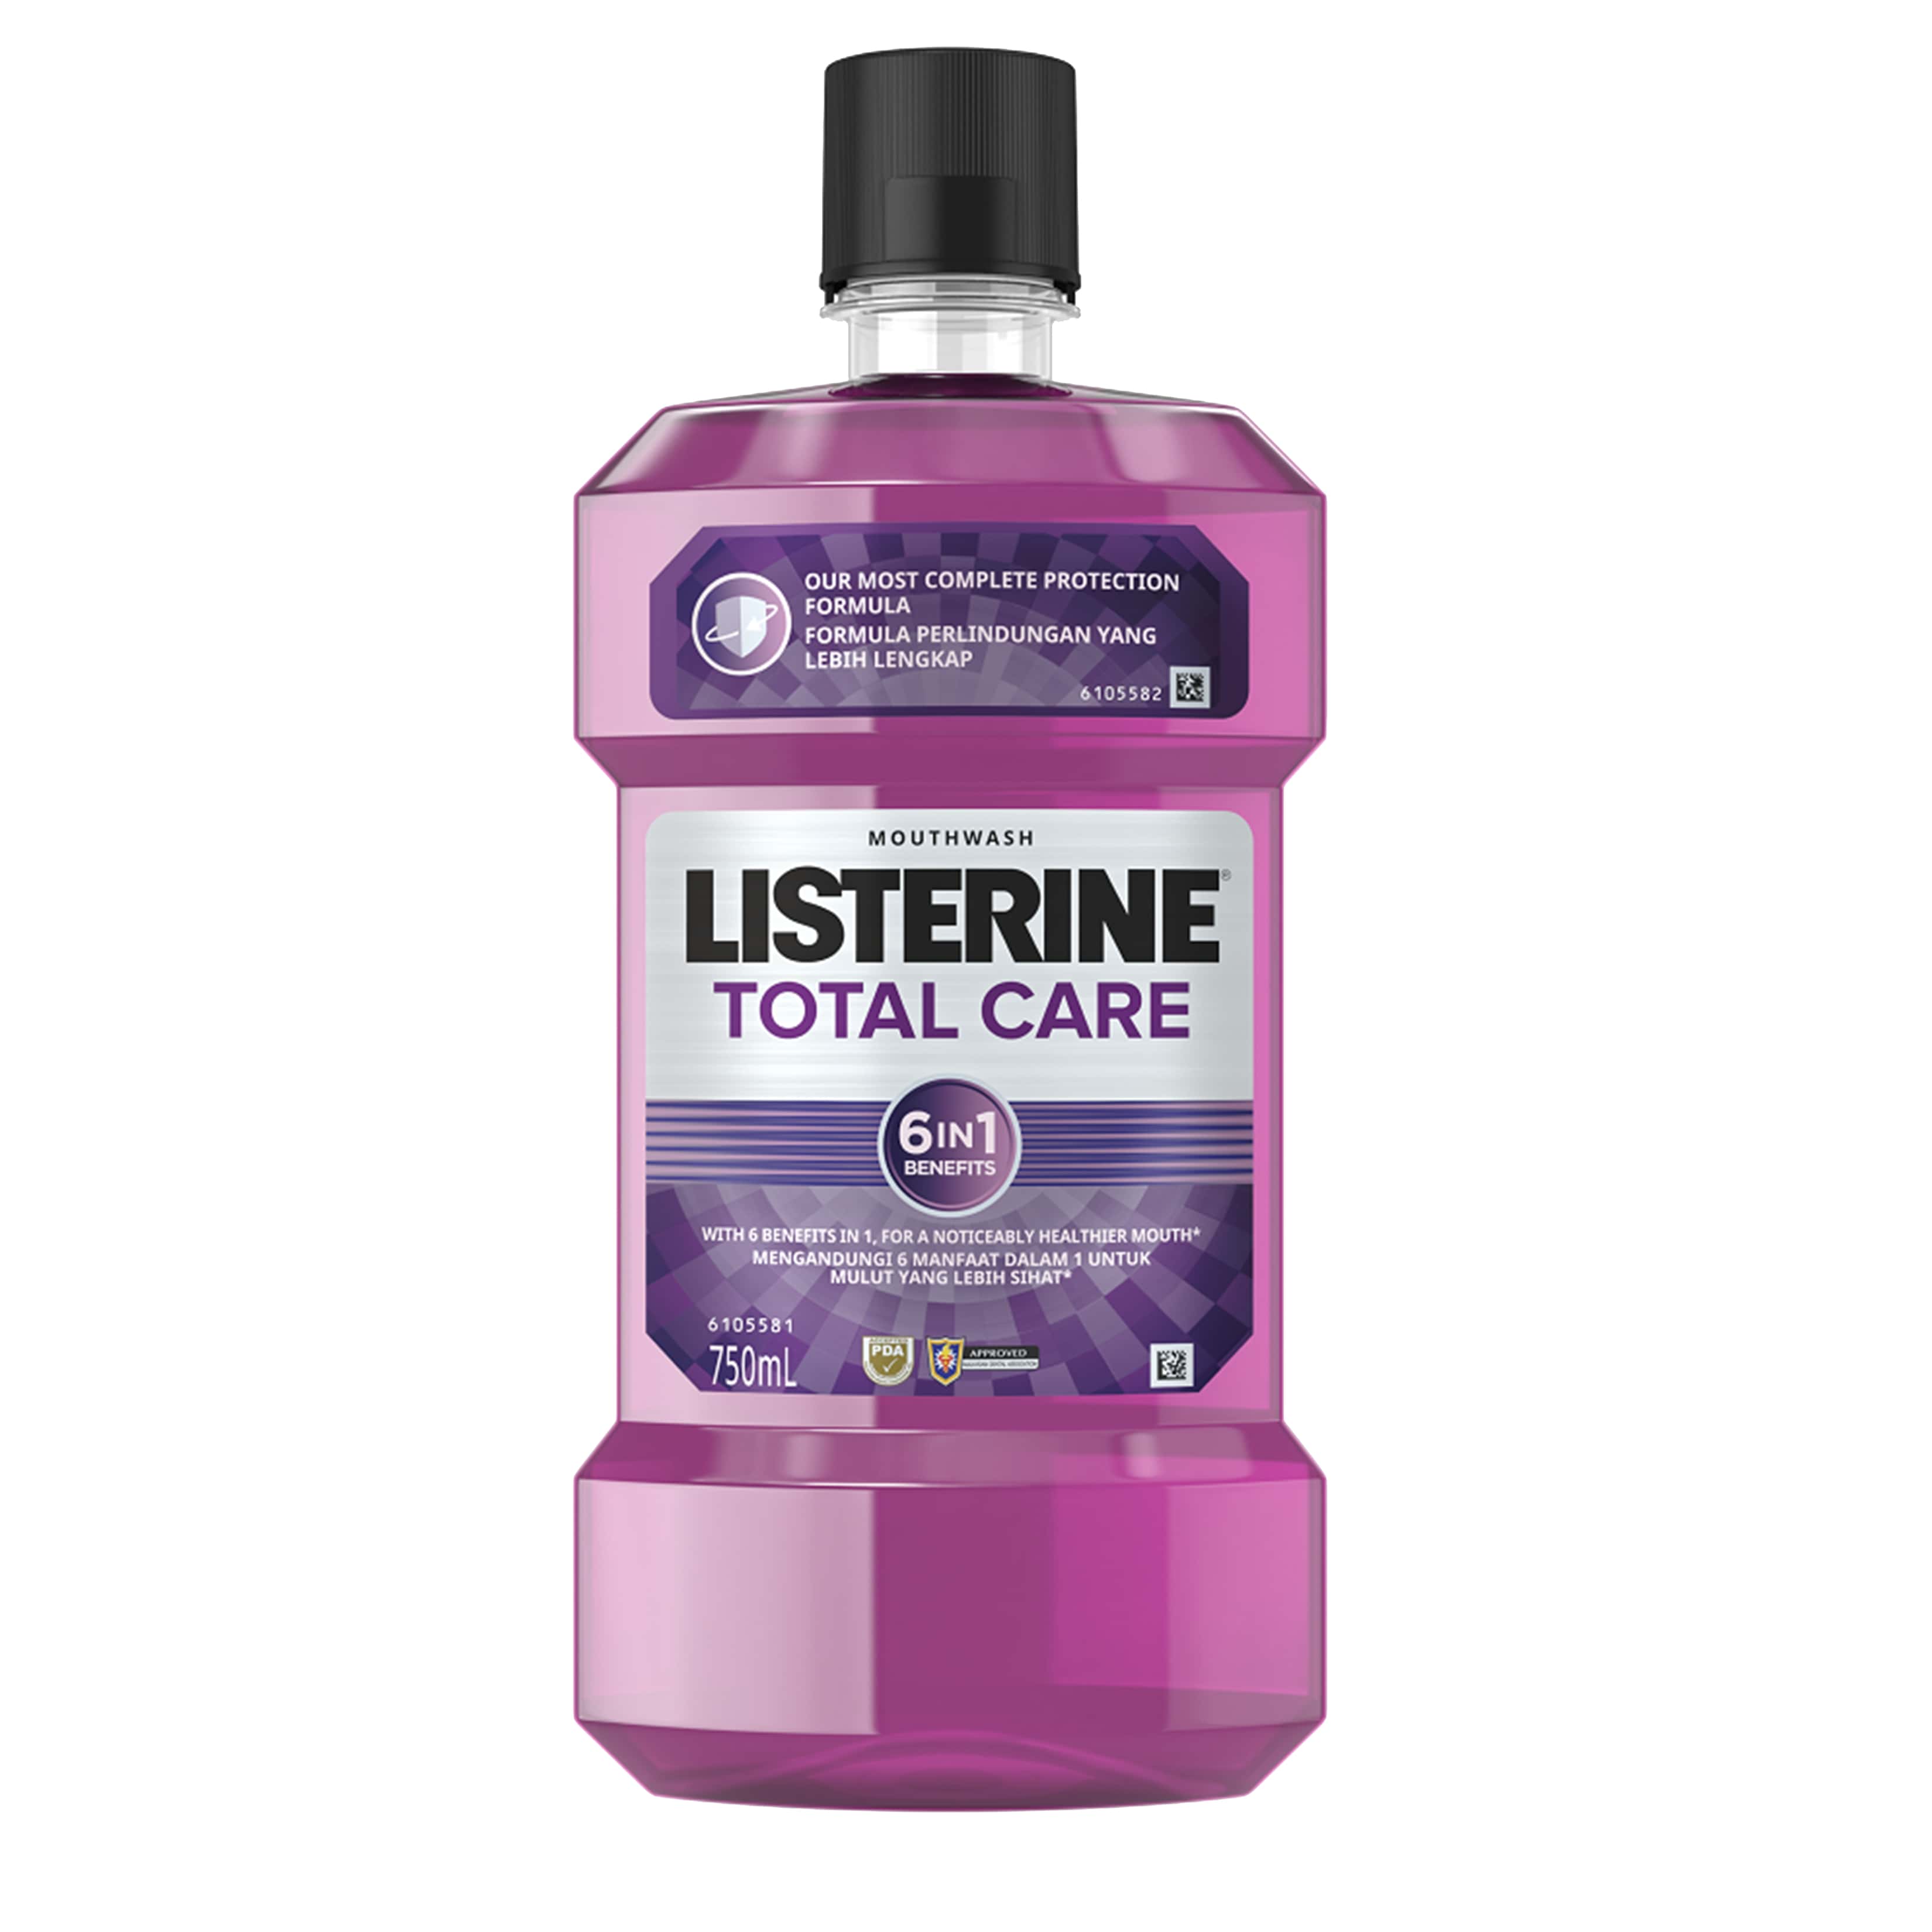 LISTERINE® TOTAL CARE fluoride-containing Mouthwash